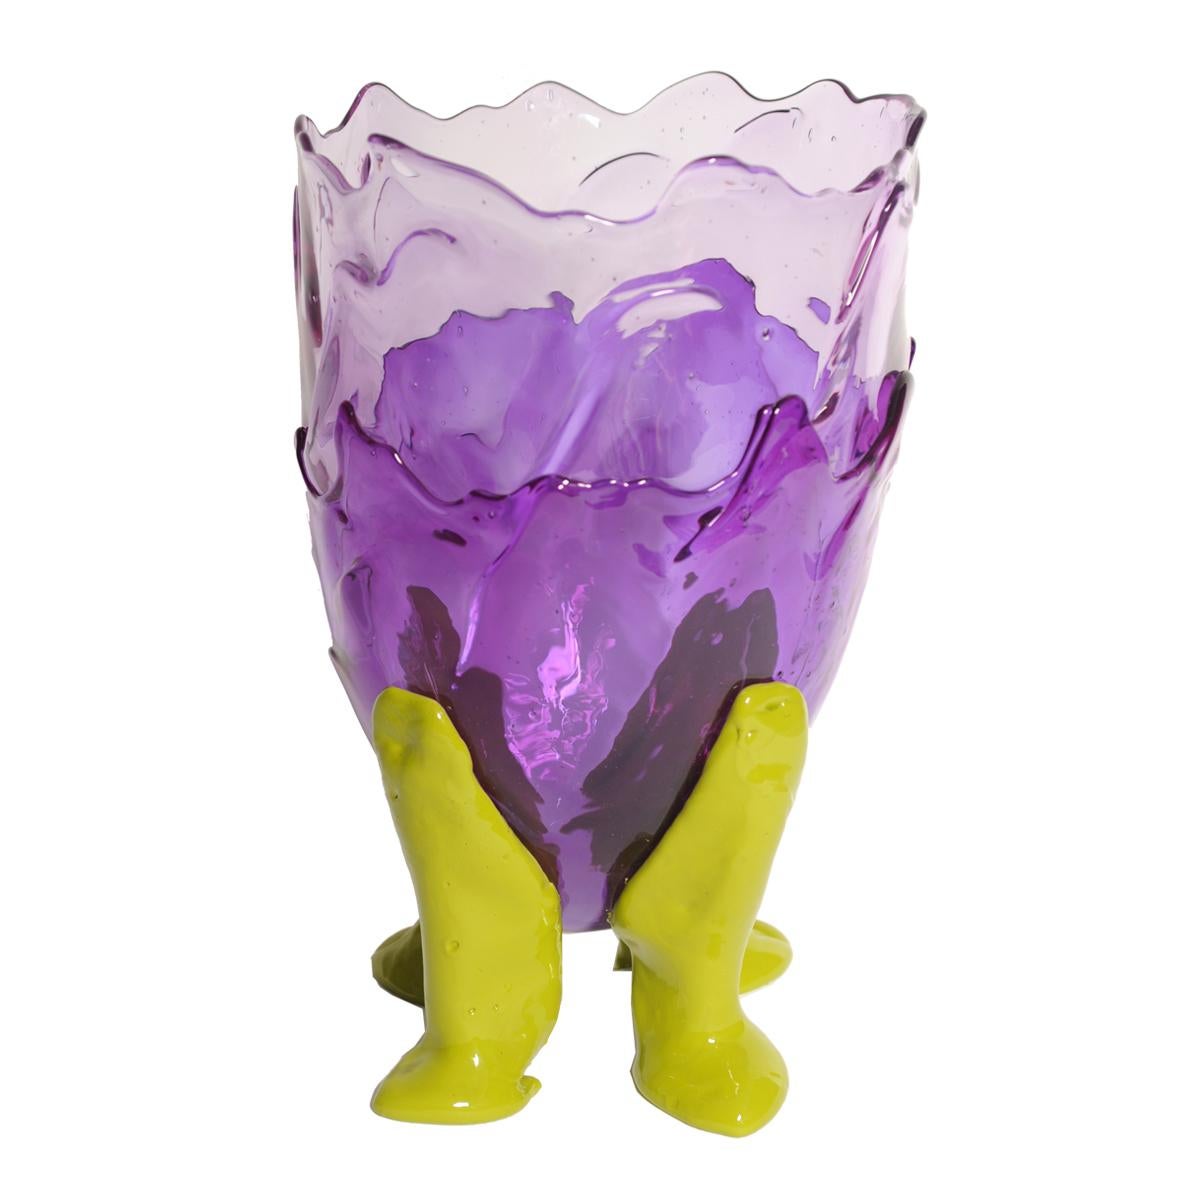 Clear extra colour vase - clear lilac, clear purple, matt dusty green.

Vase in soft resin designed by Gaetano Pesce in 1995 for Fish Design collection.

Measures: XL - ø 30cm x H 56cm
Colours: clear lilac, clear purple, matt dusty